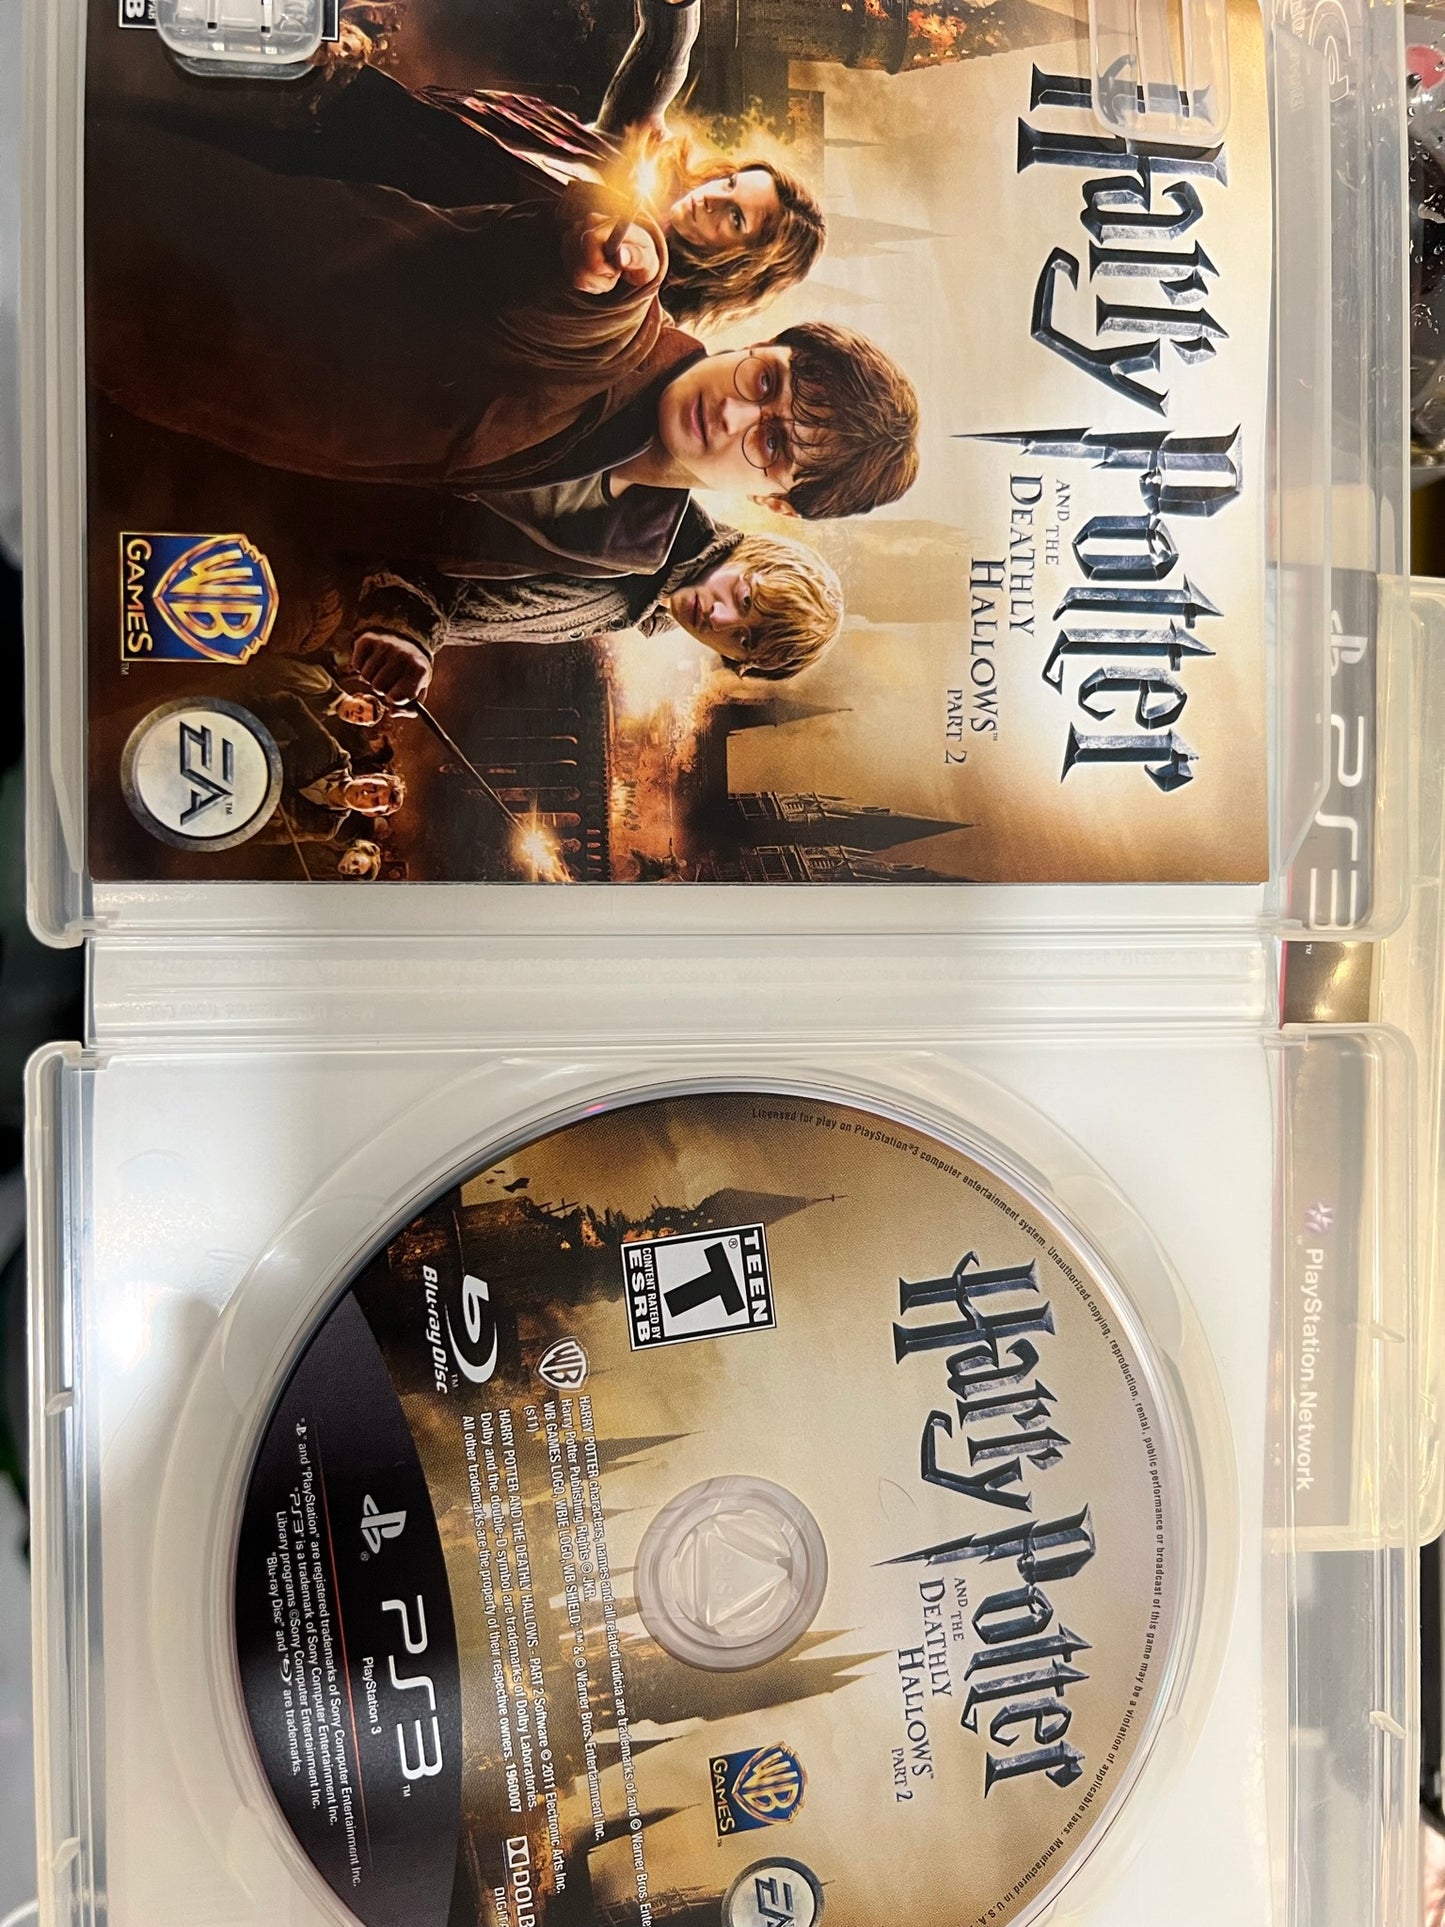 Harry Potter and the Deathly Hallows: Part 2 (PlayStation 3) PS3